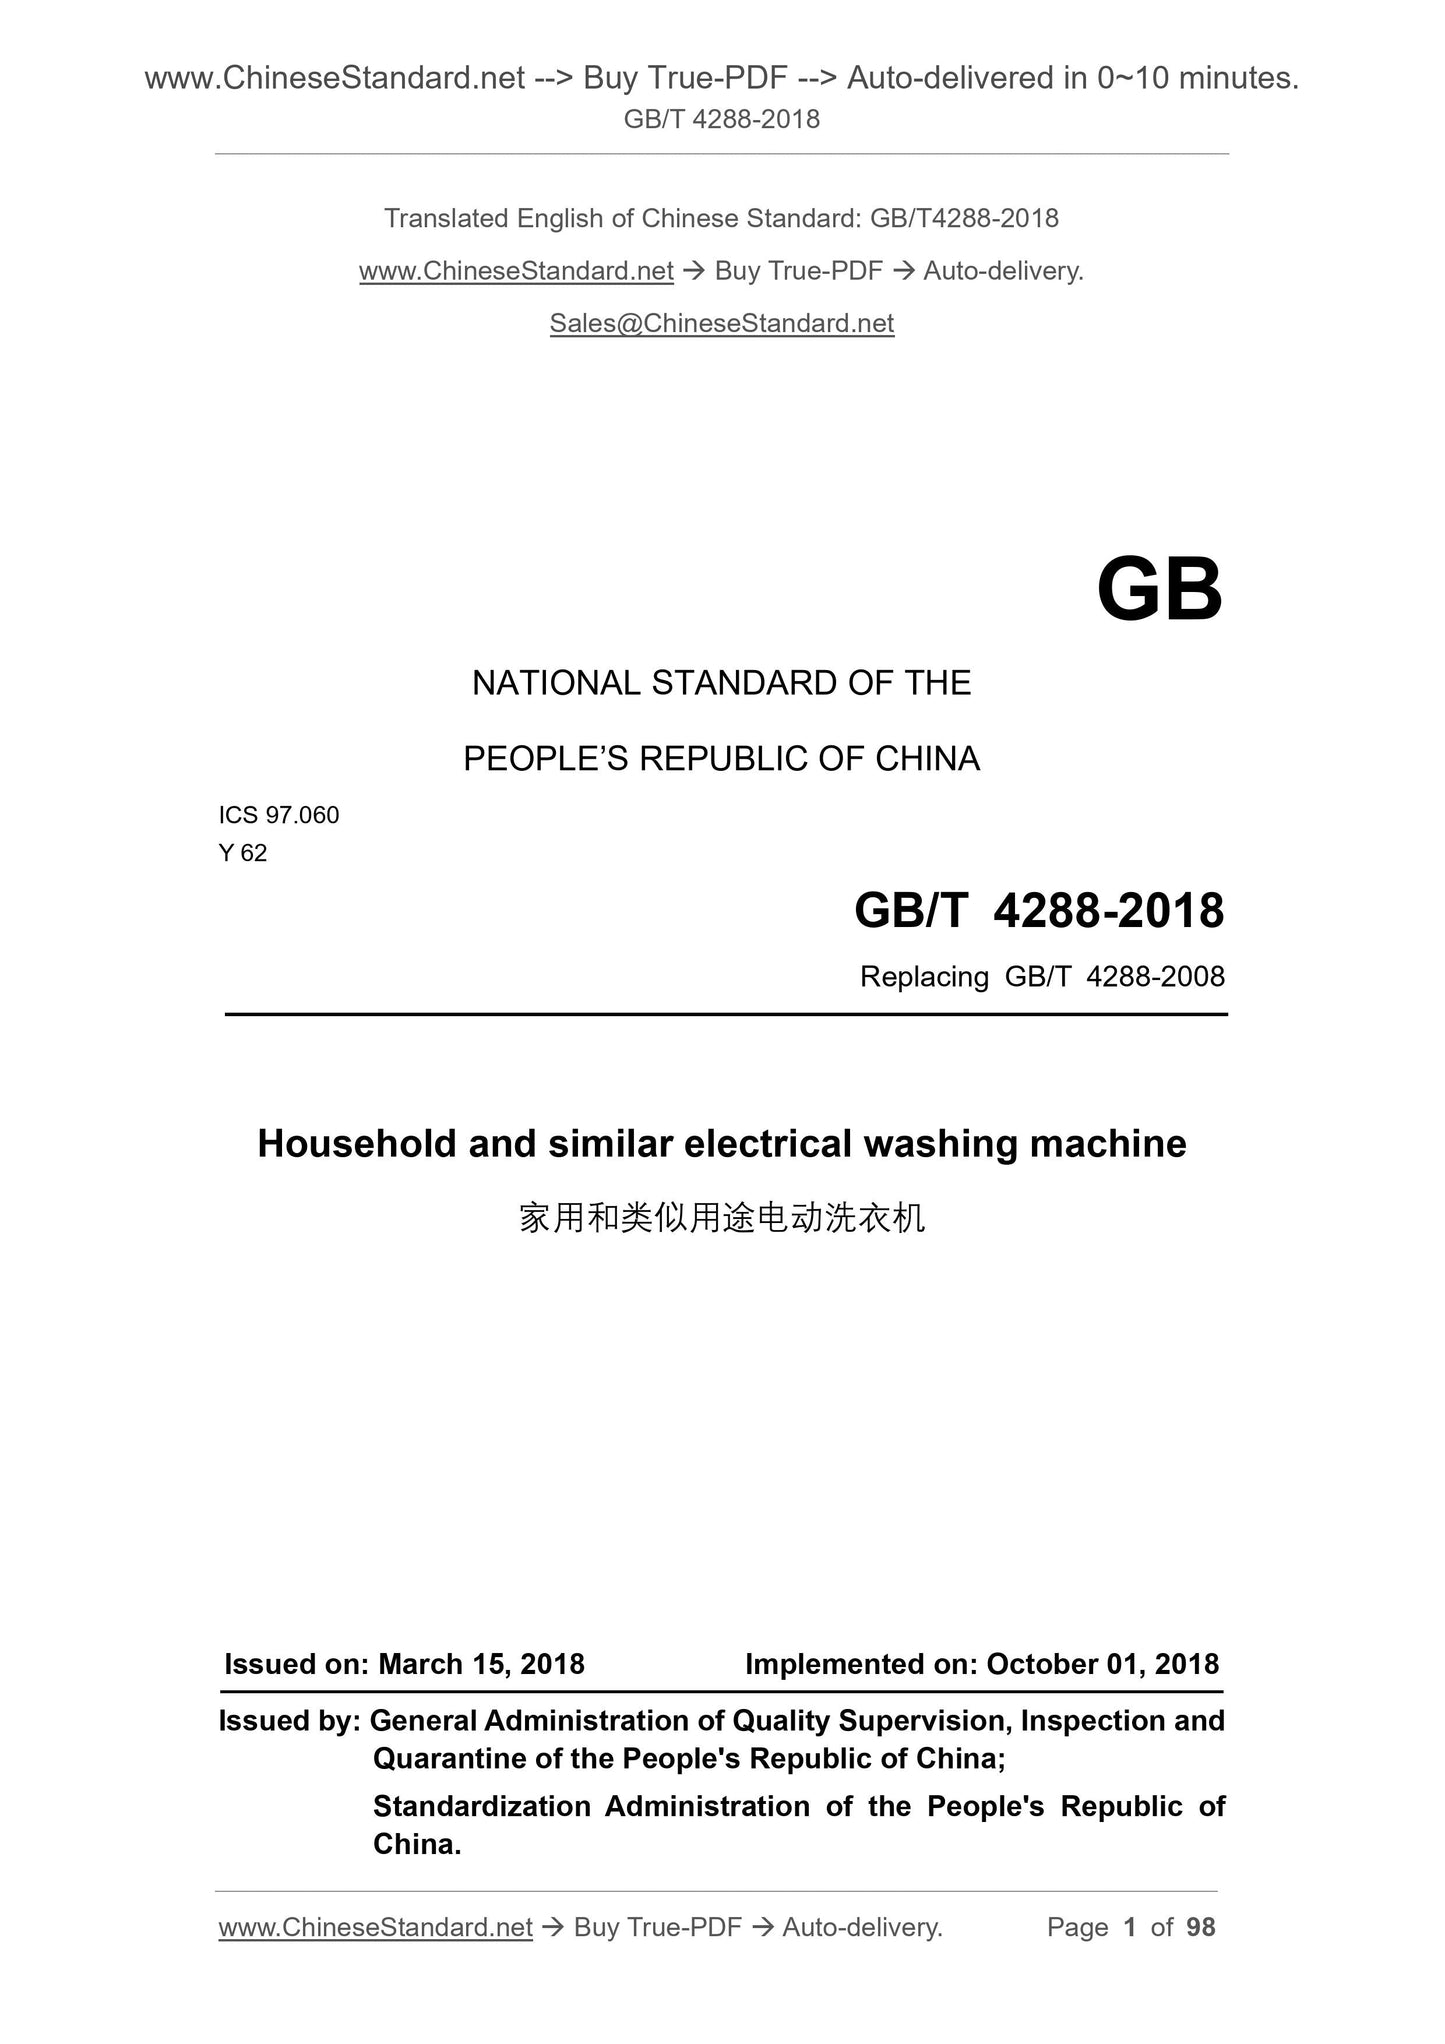 GB/T 4288-2018 Page 1